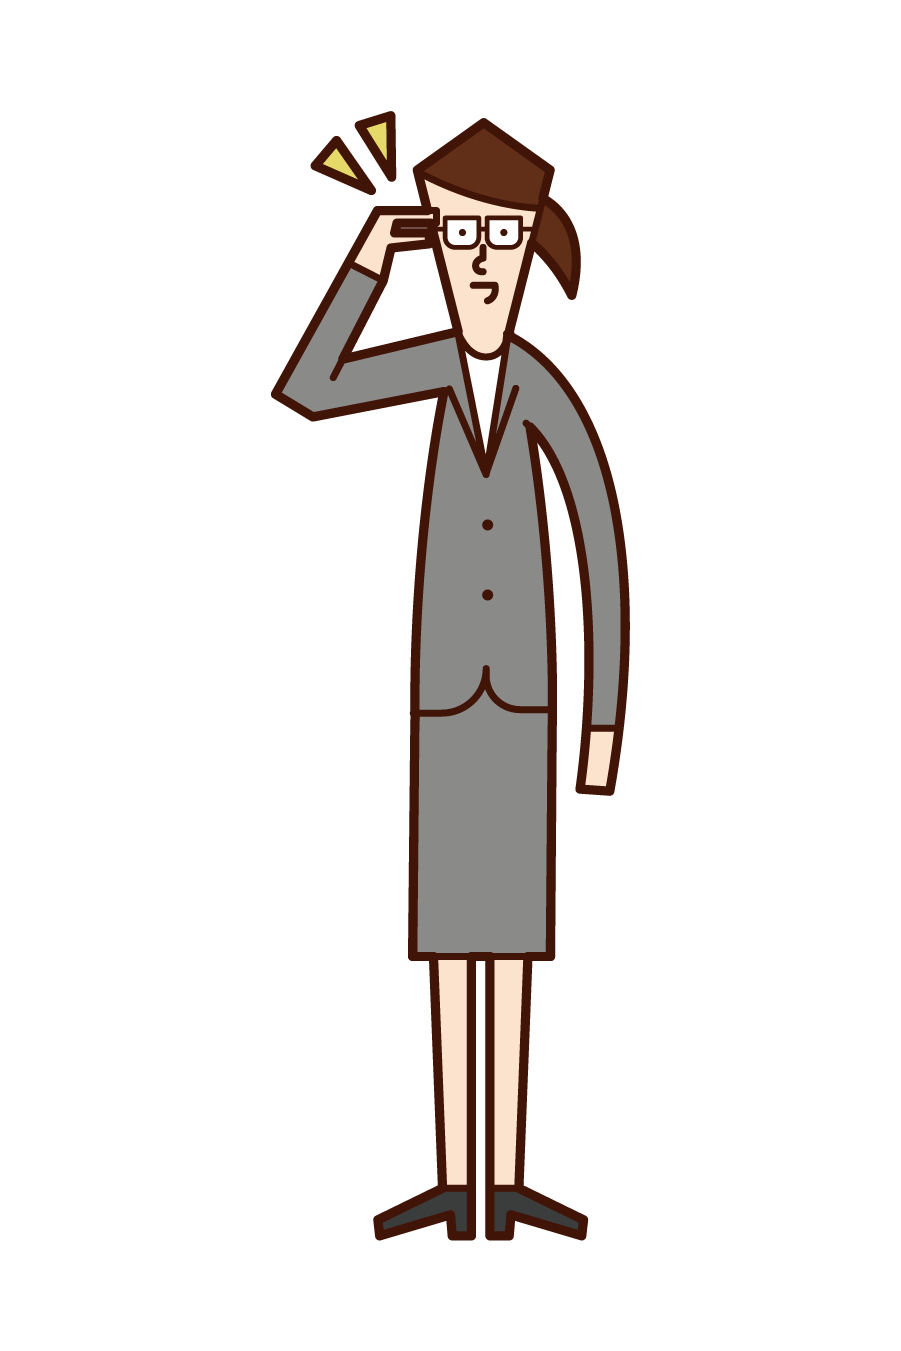 Illustration of a woman putting her finger on glasses